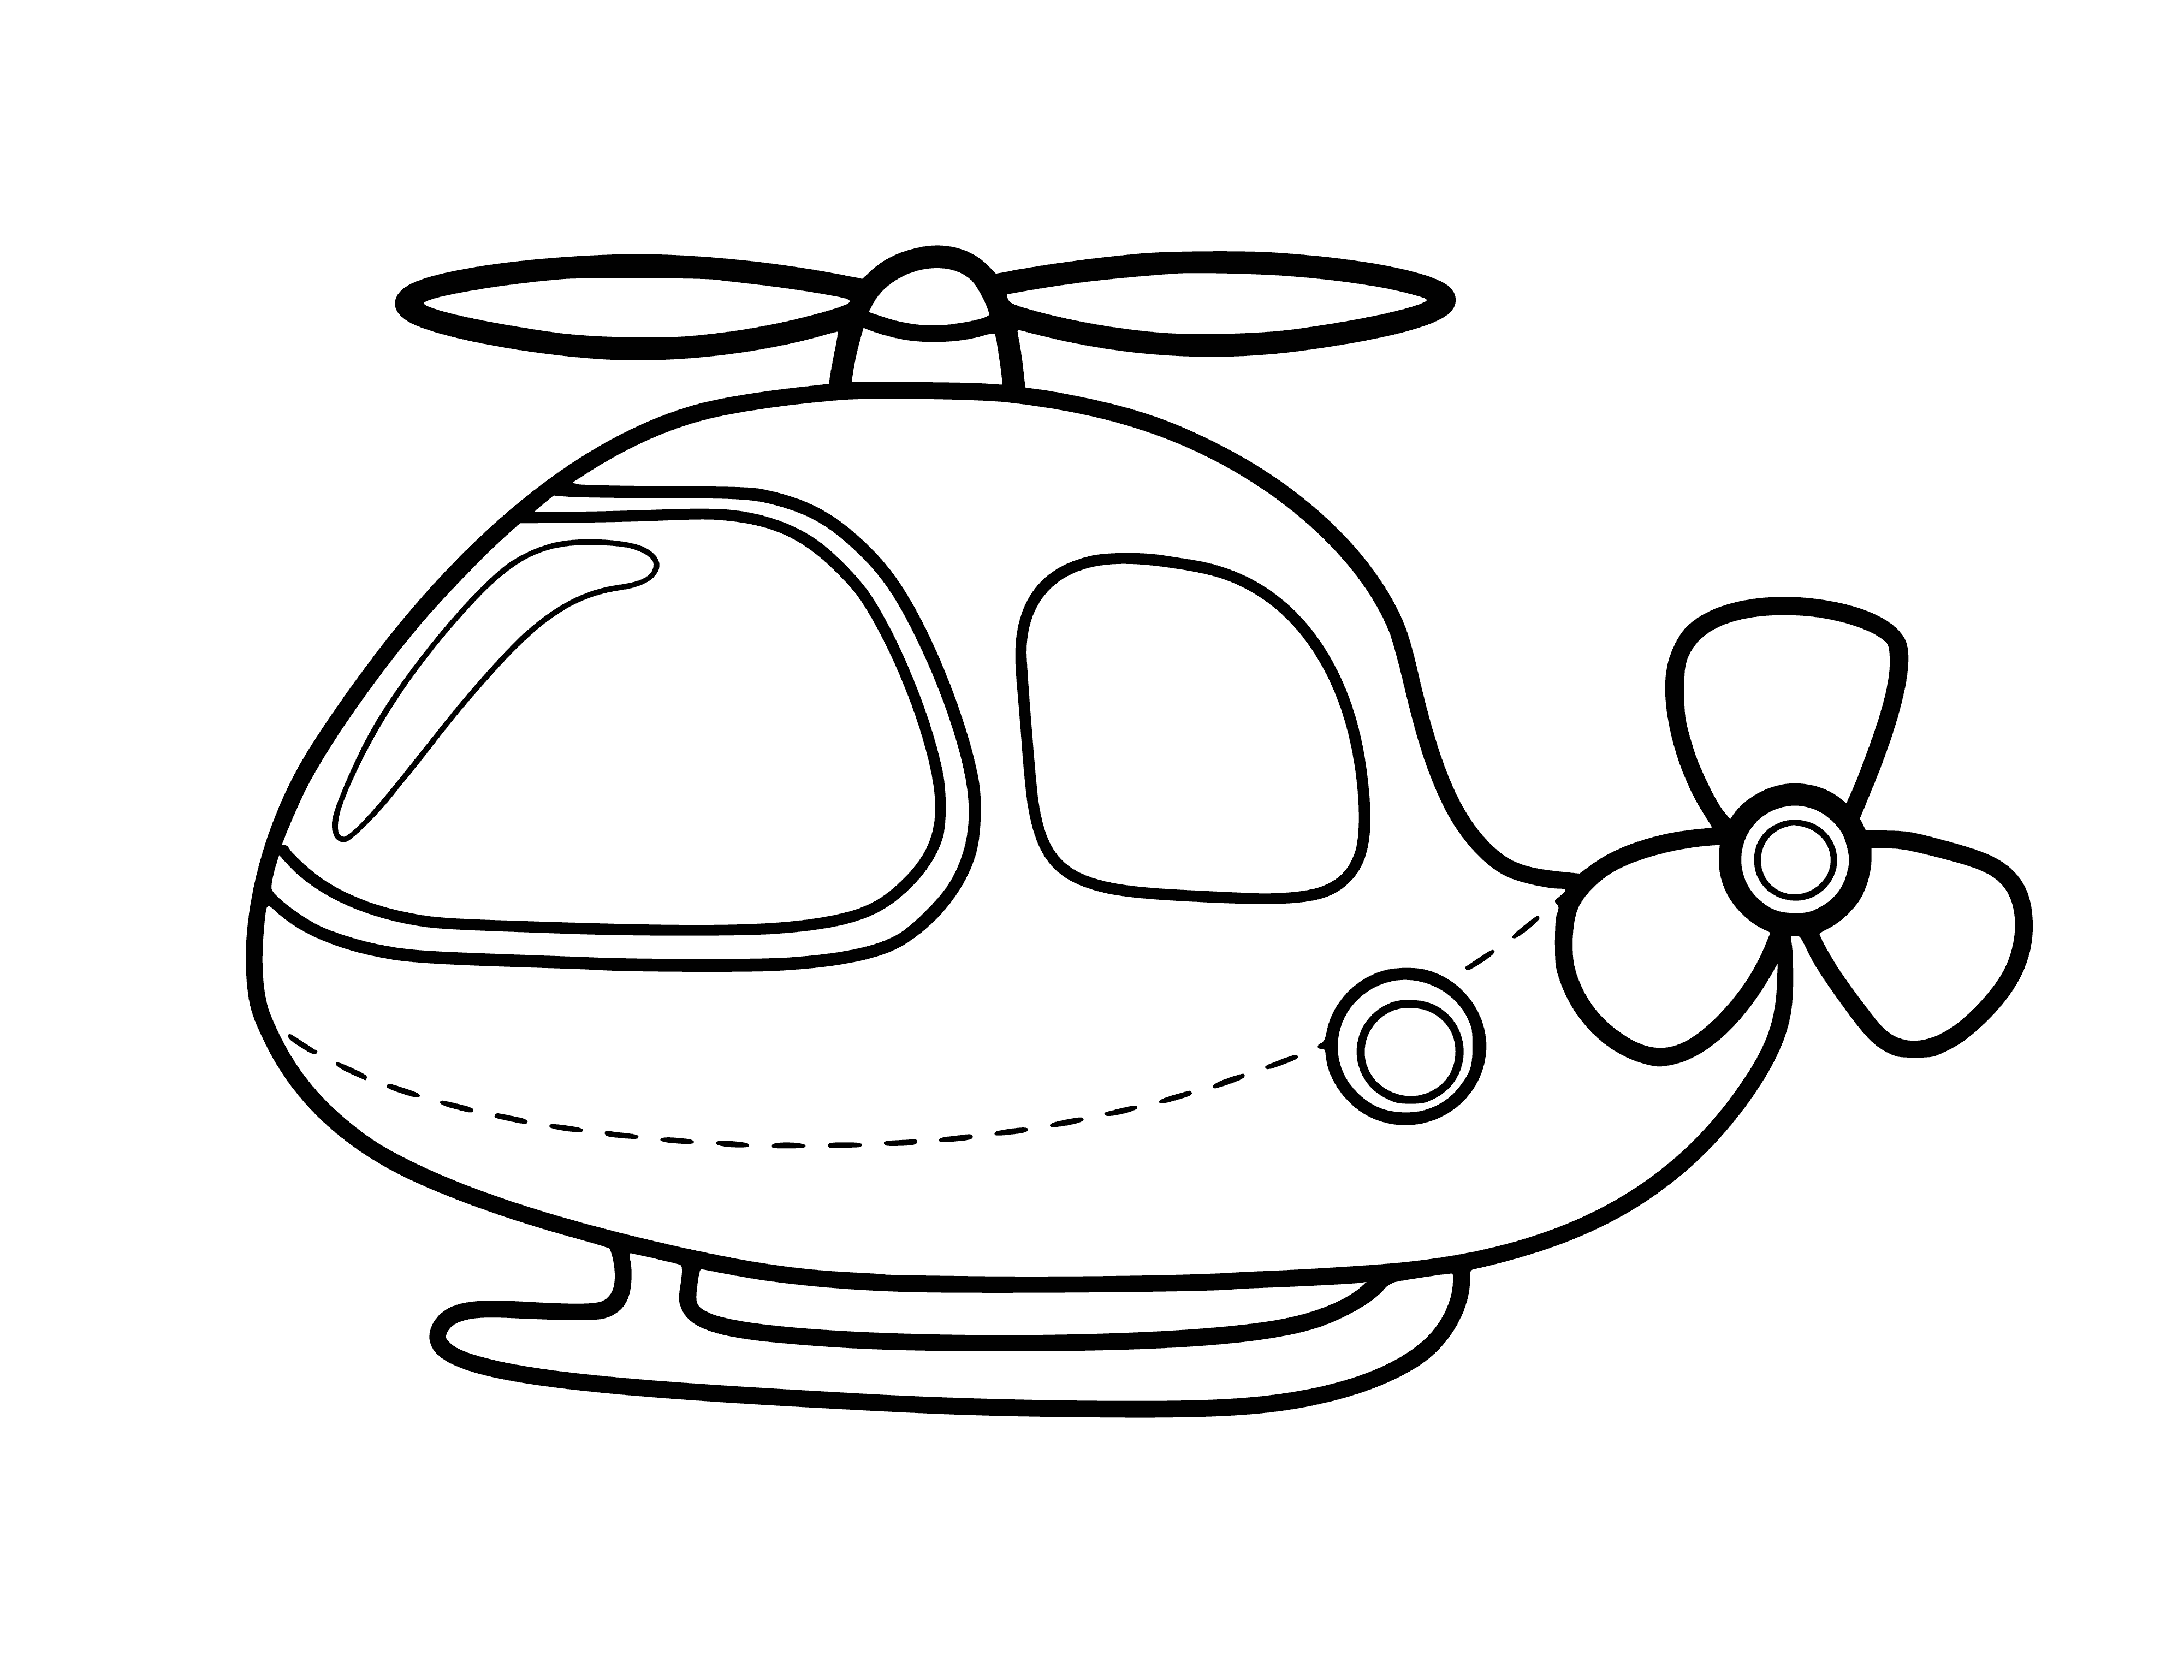 coloring page: Sunny day skies filled with a helicopter adventure!